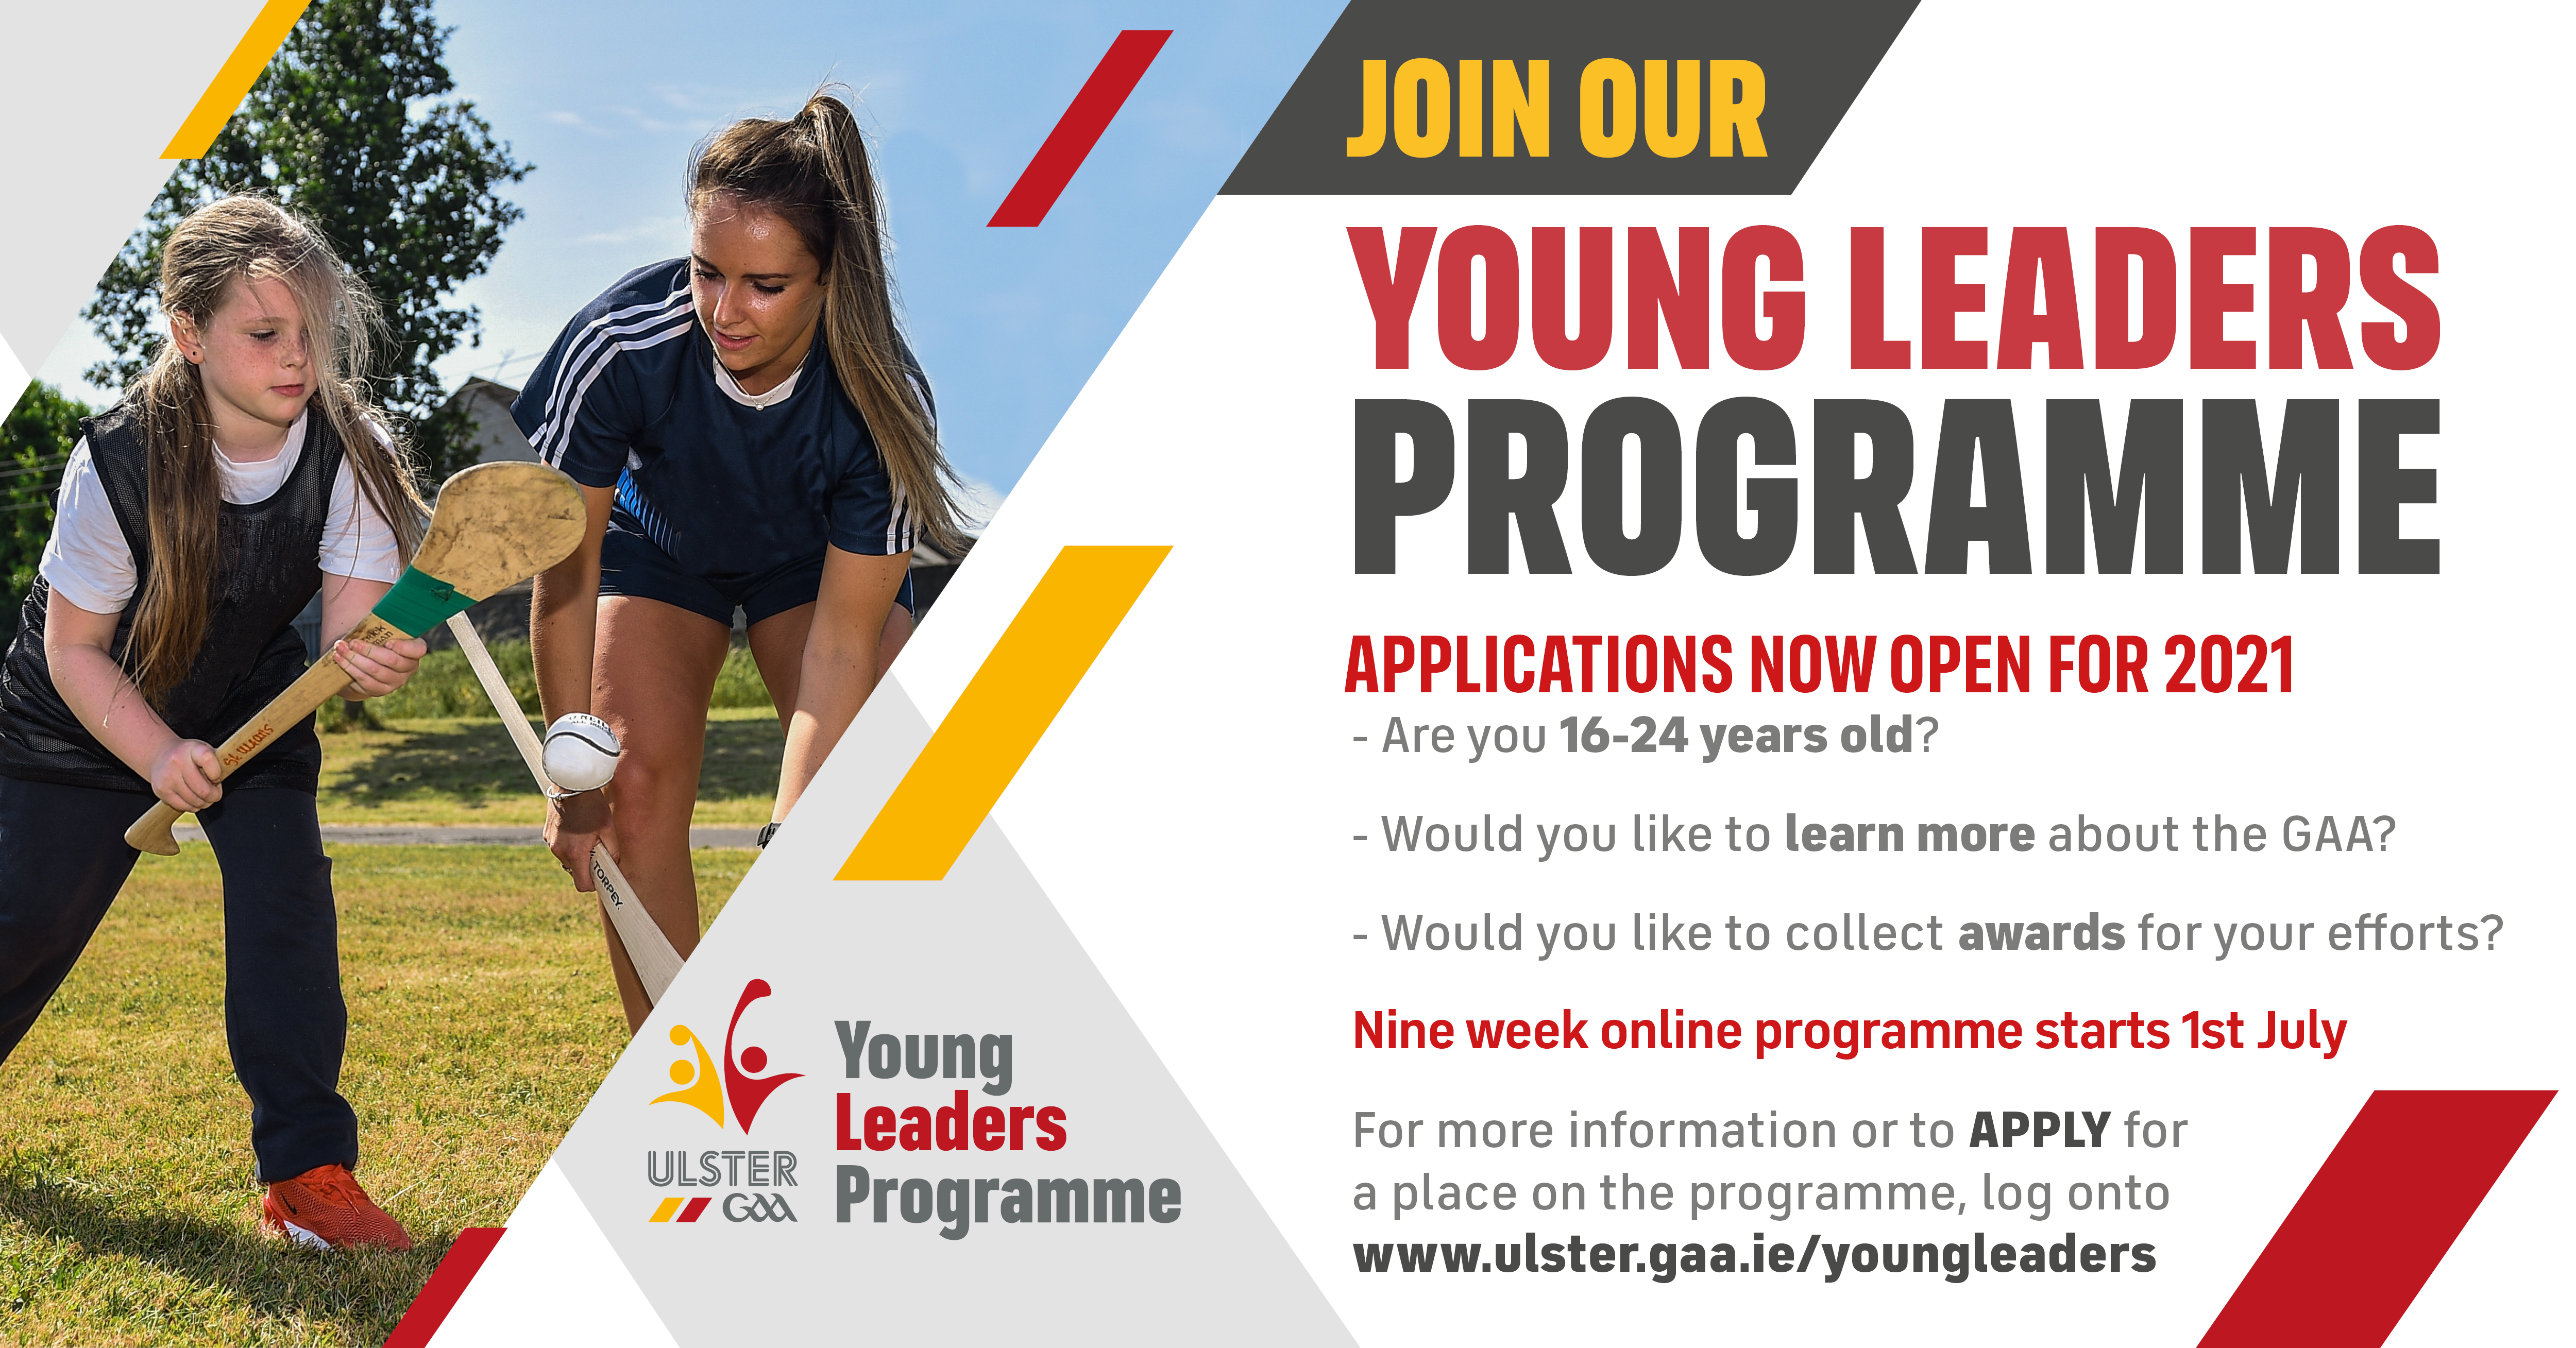 Exceptional opportunity as Ulster GAA Young Leaders Programme opens for applications